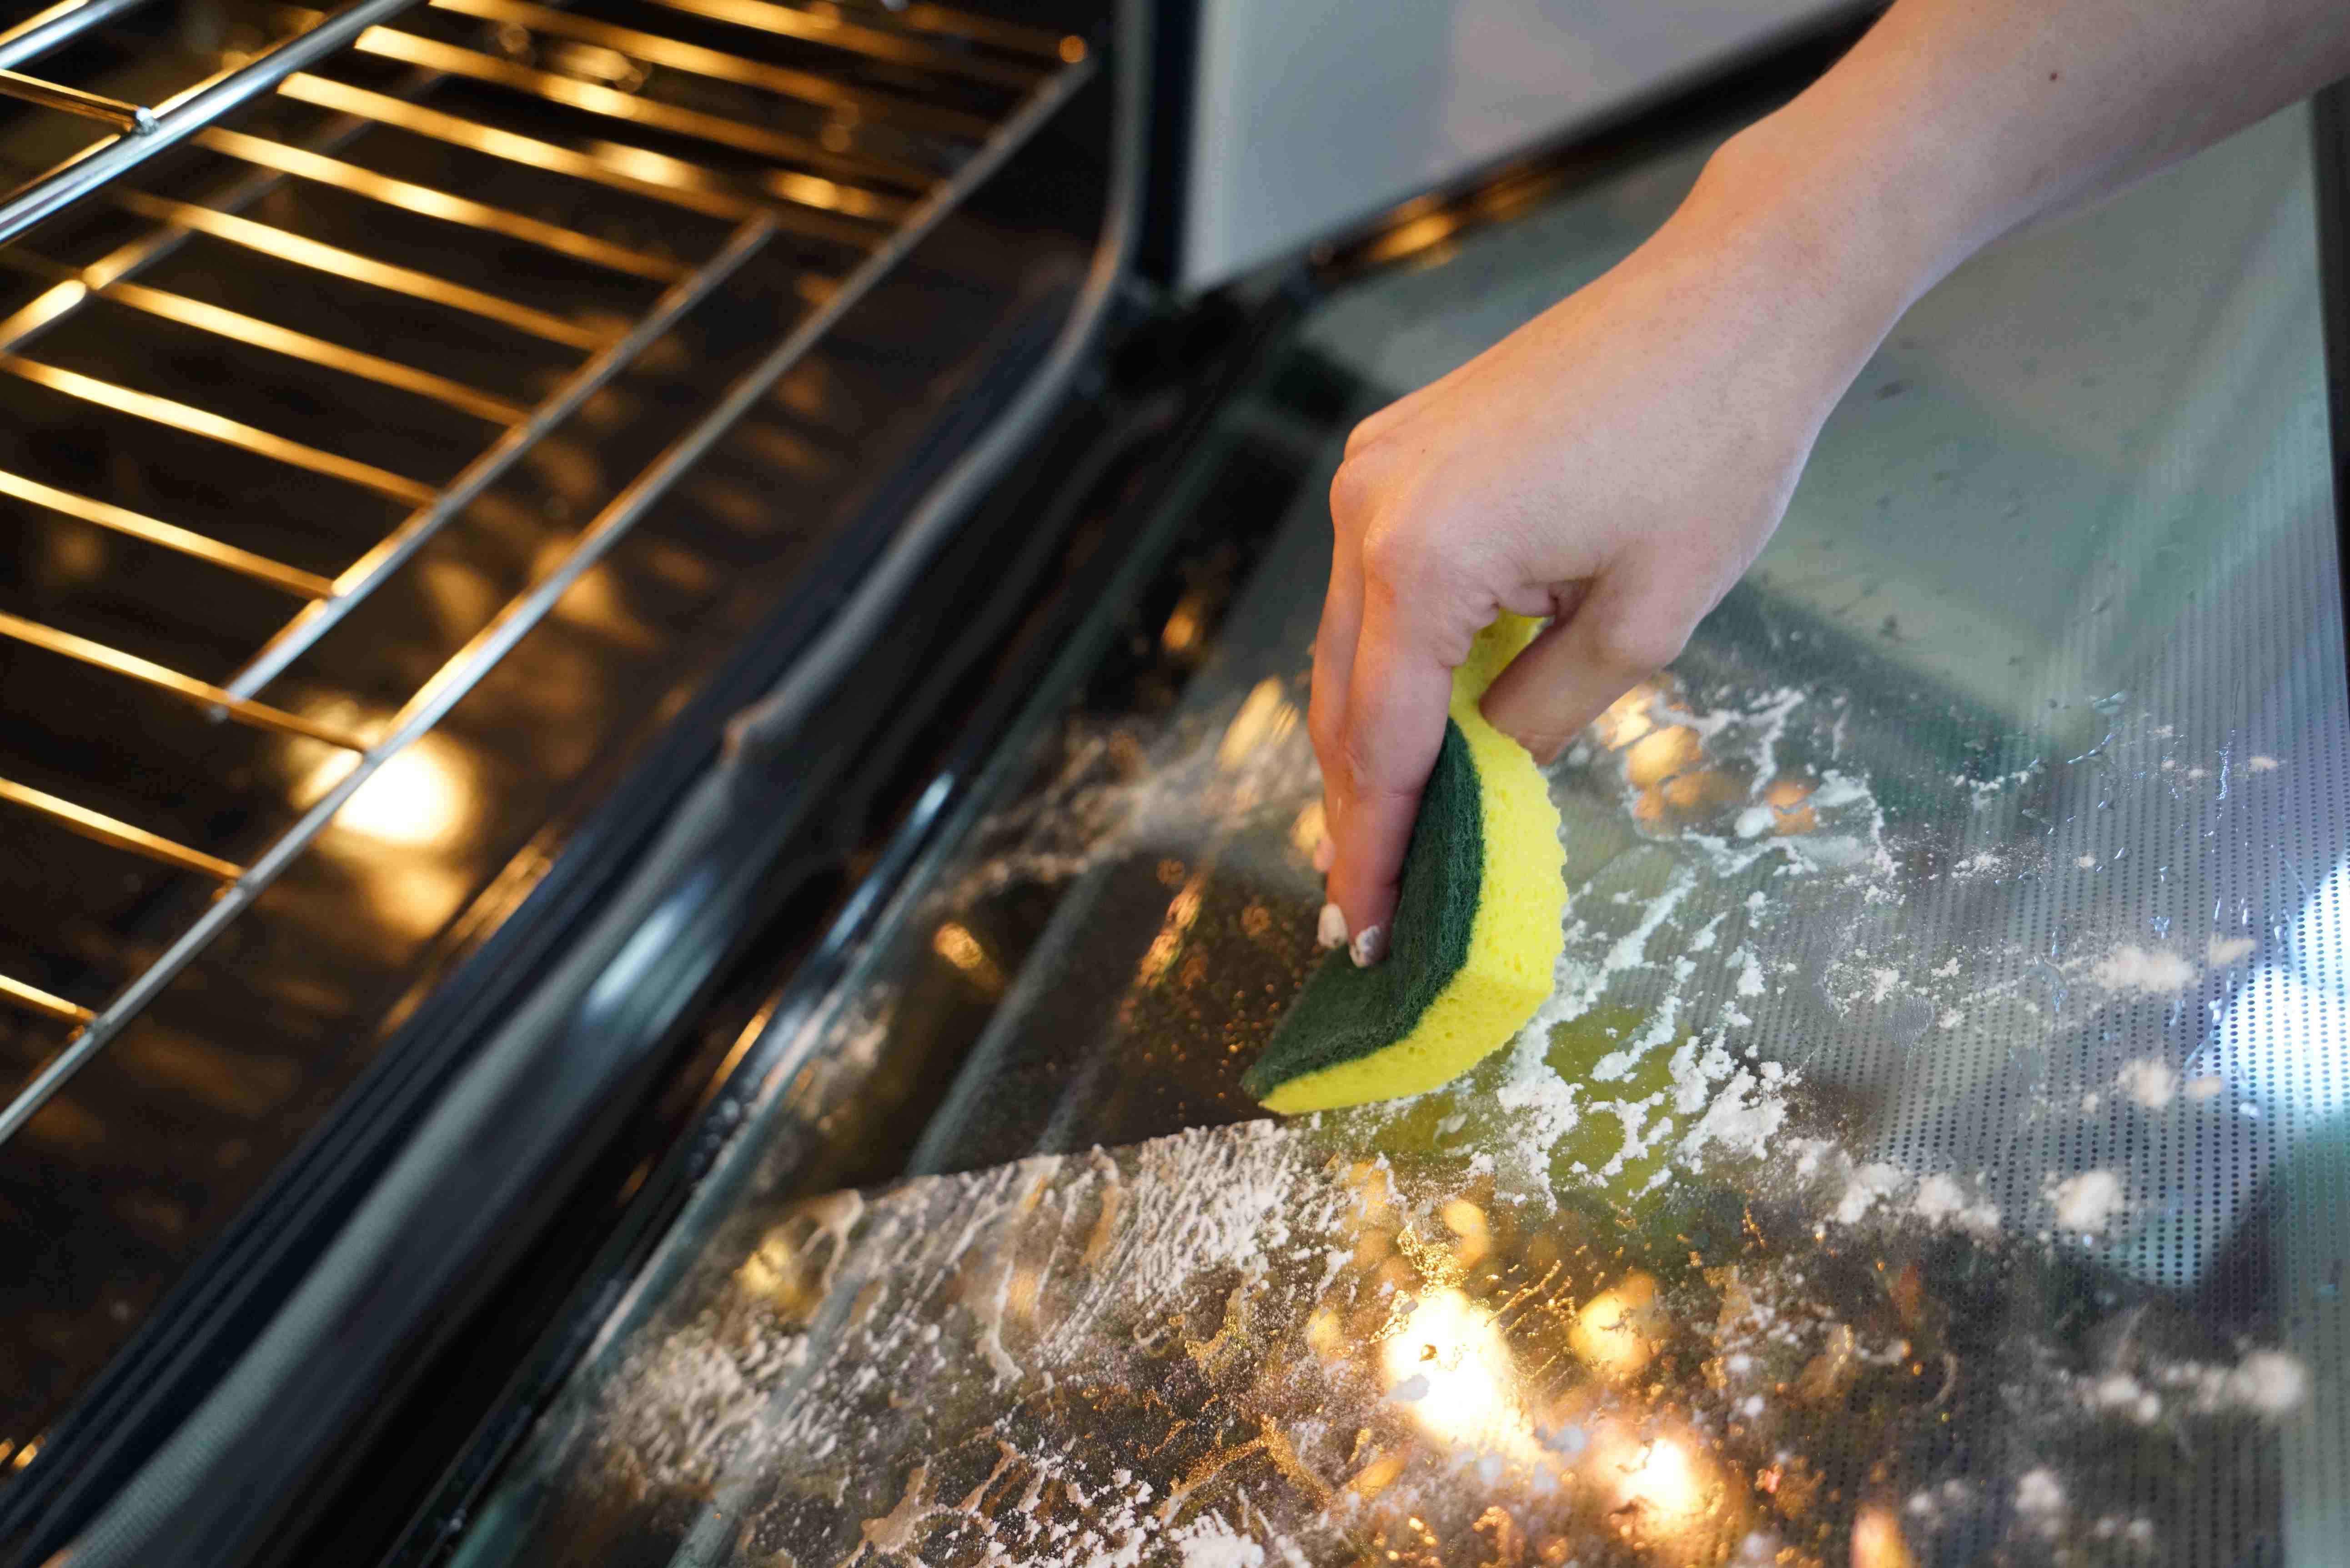 Clean Your Oven With Baking Soda